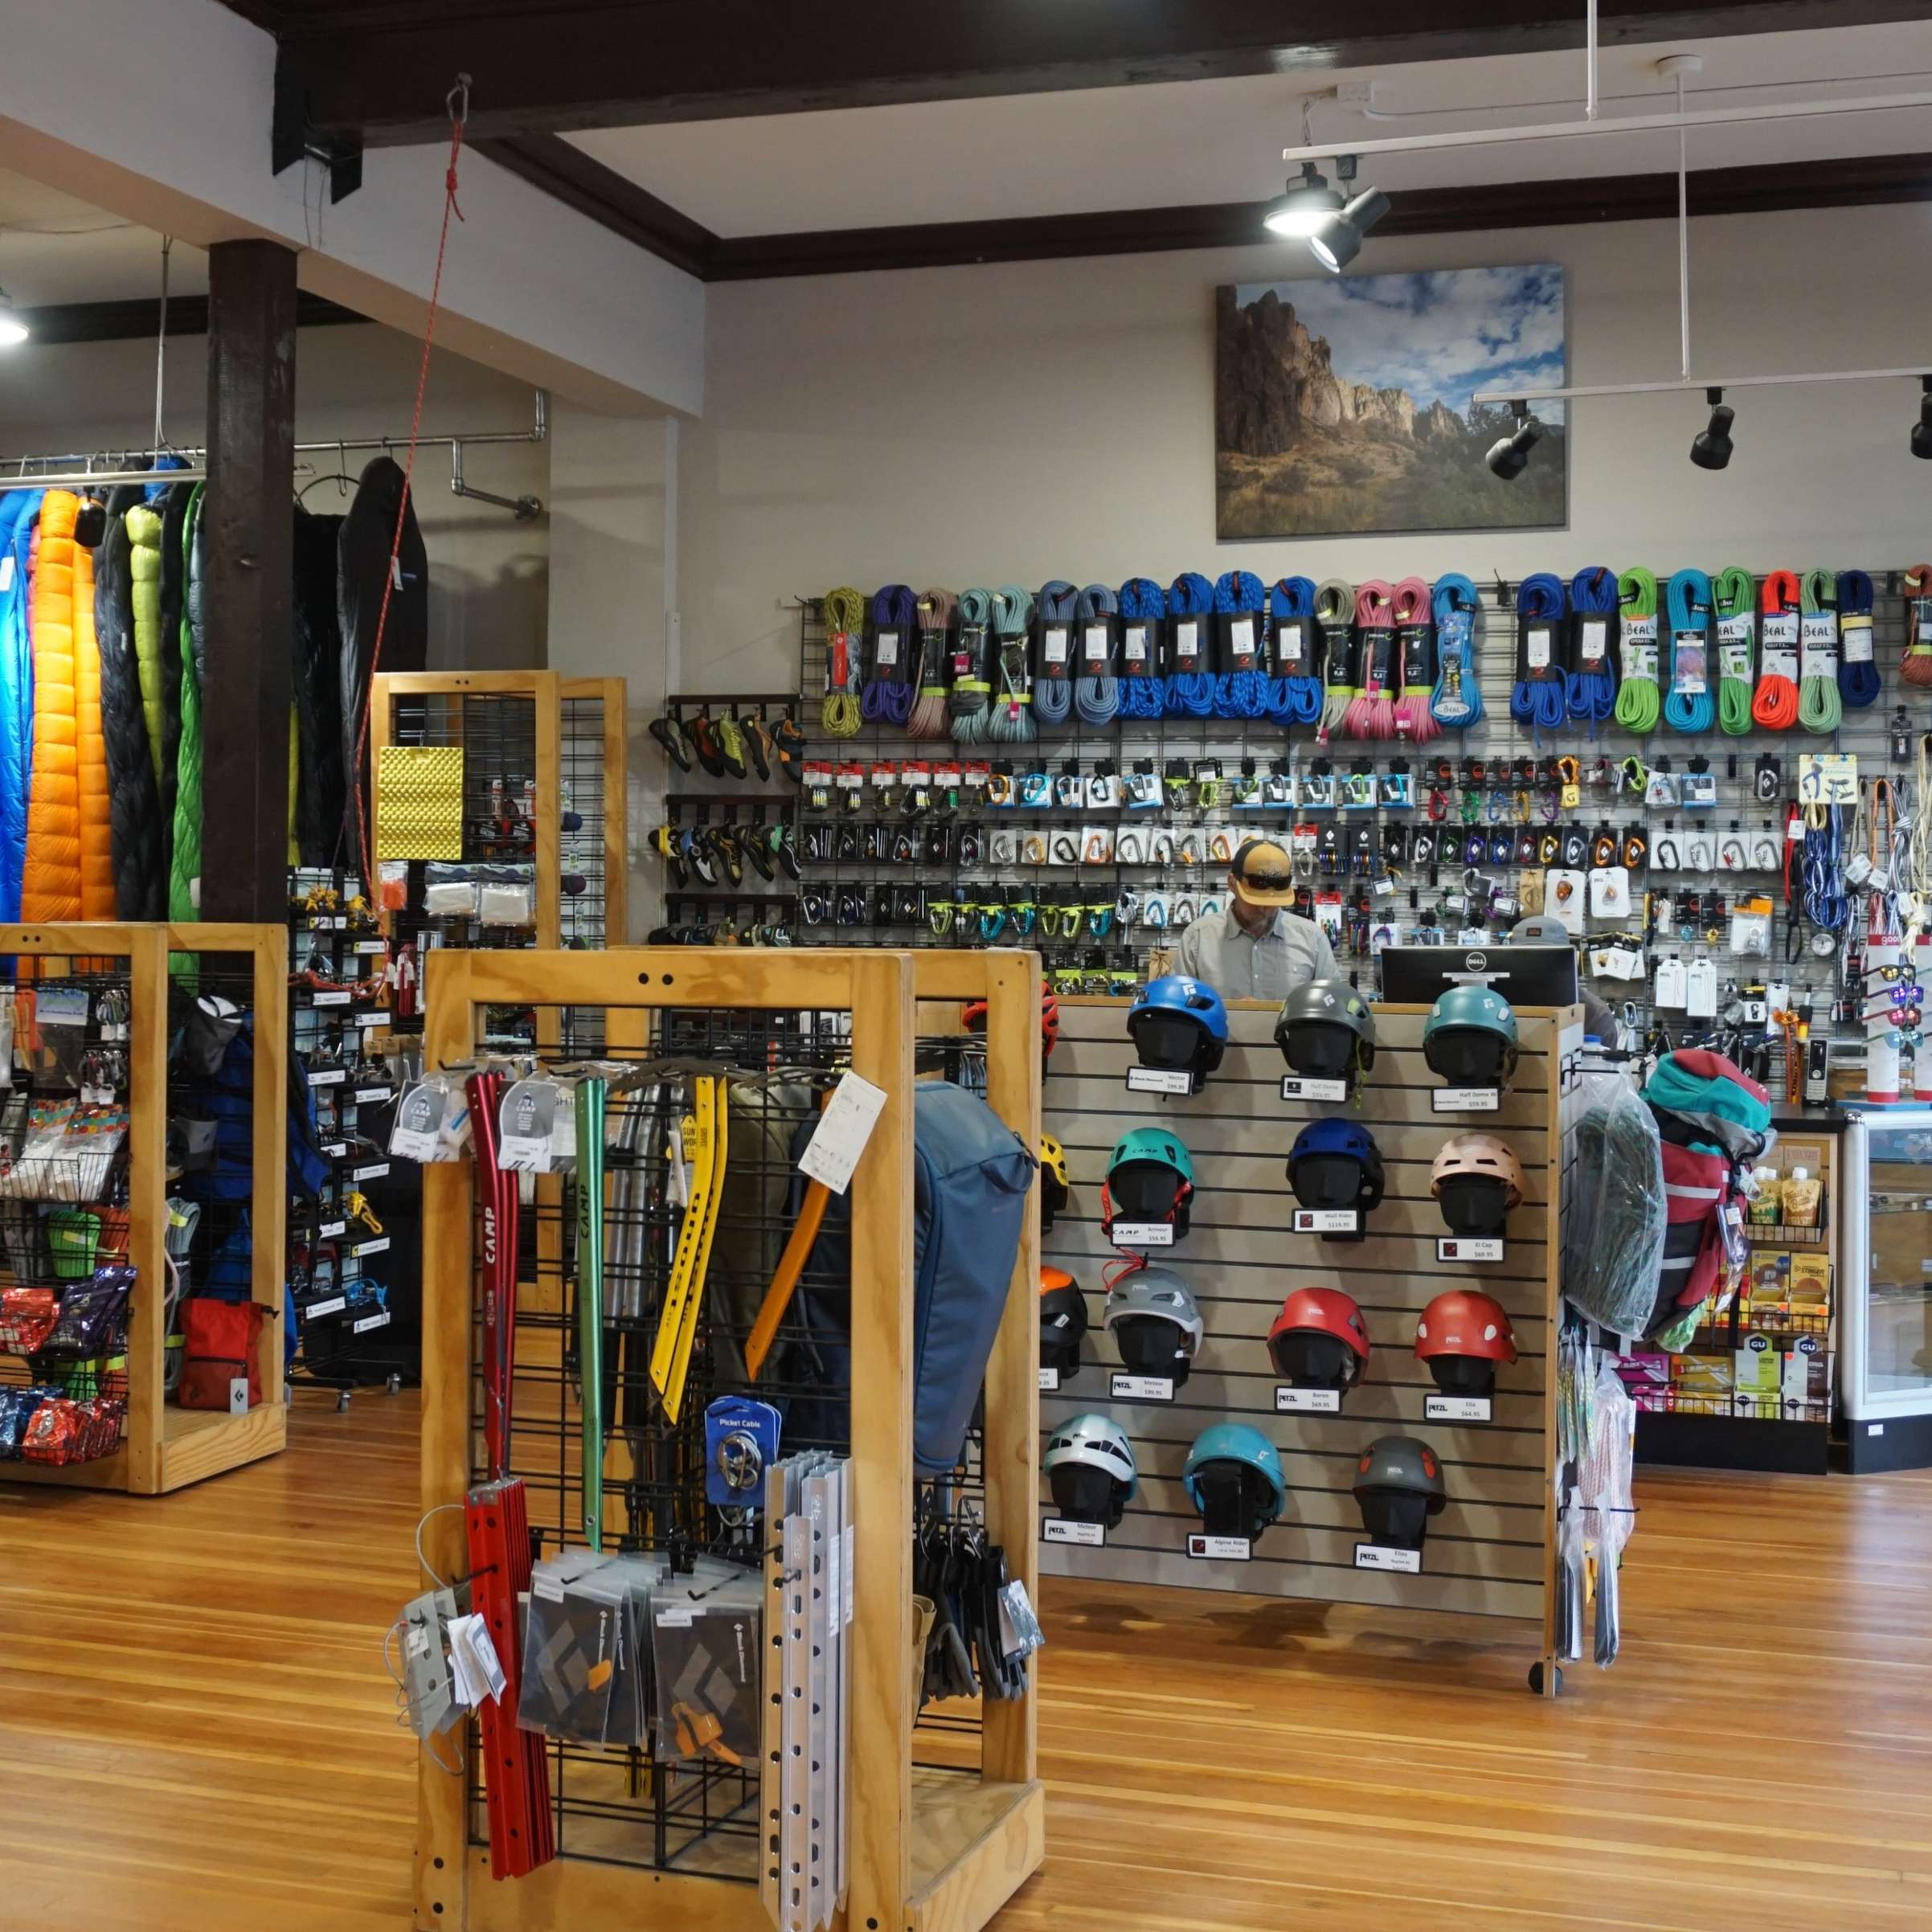 Interior view of shop with outdoor recreation gear featured.